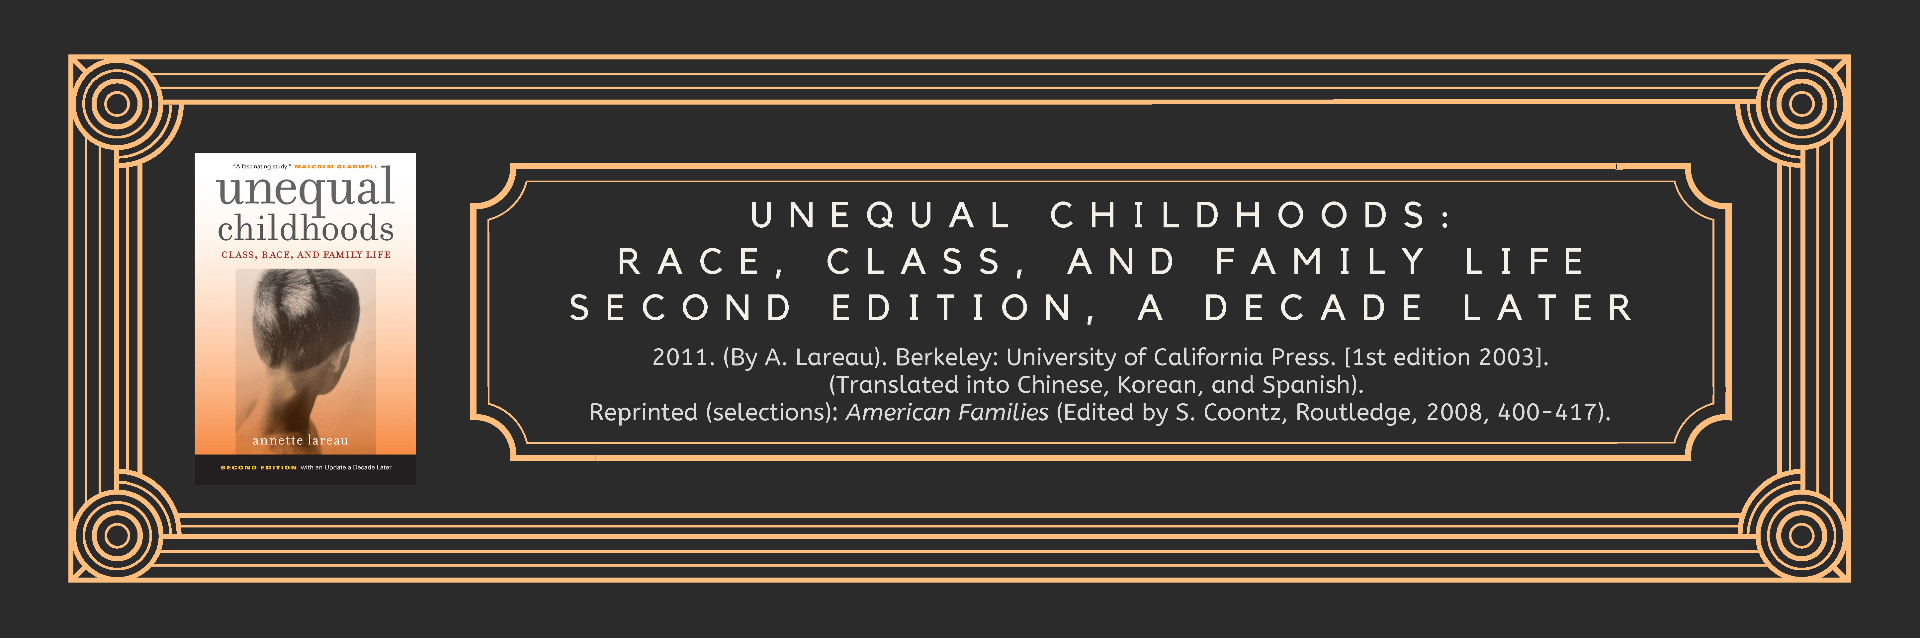 Unequal Childhoods Book Citation and Link